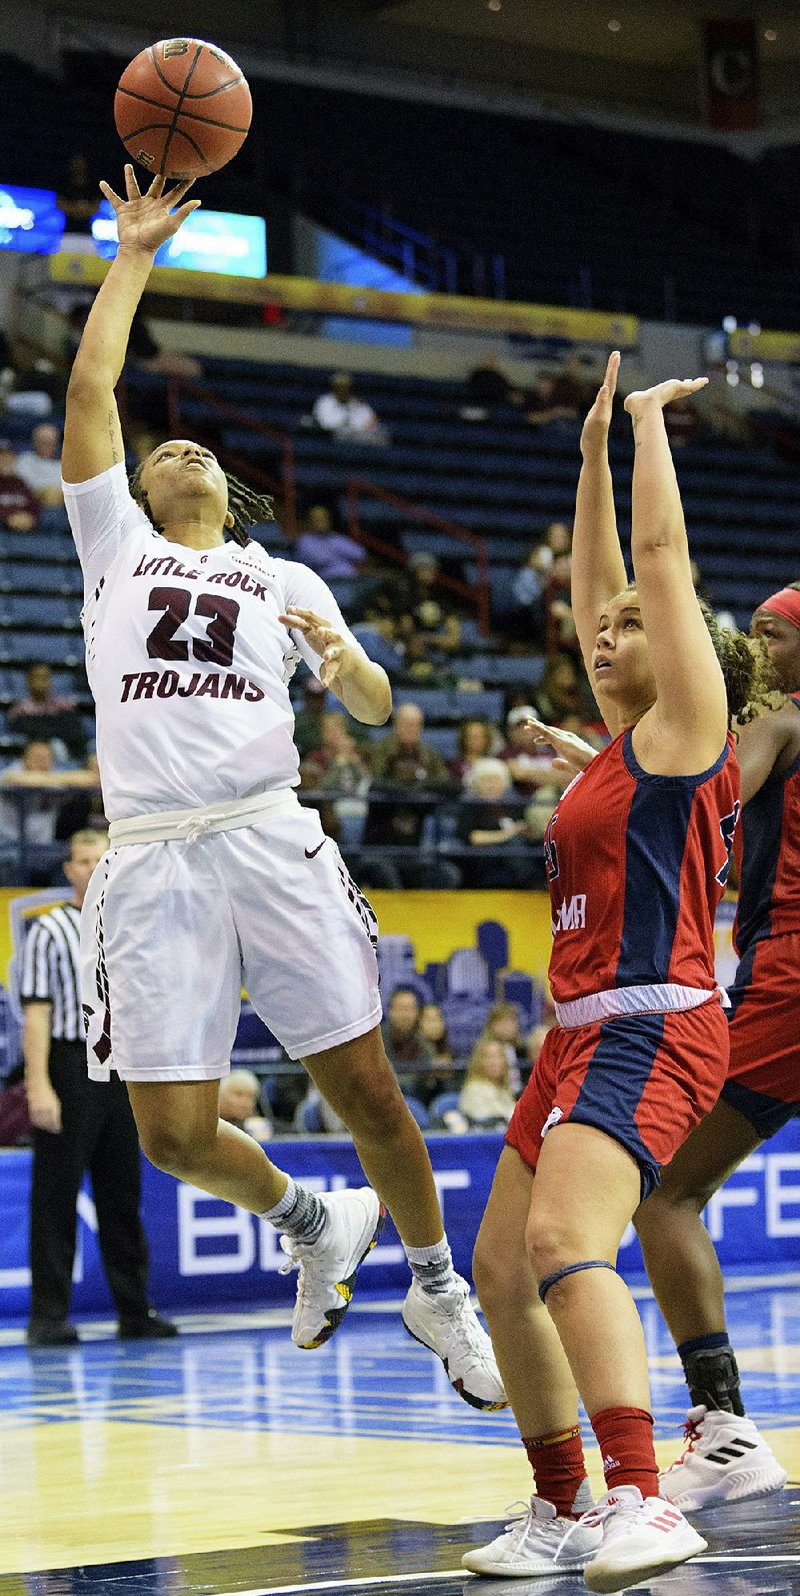 UALR guard Kyra Collier (23) averaged 14.4 points per game last season for the Trojans, who went 21-11 and qualified for the NCAA Women’s Tournament.